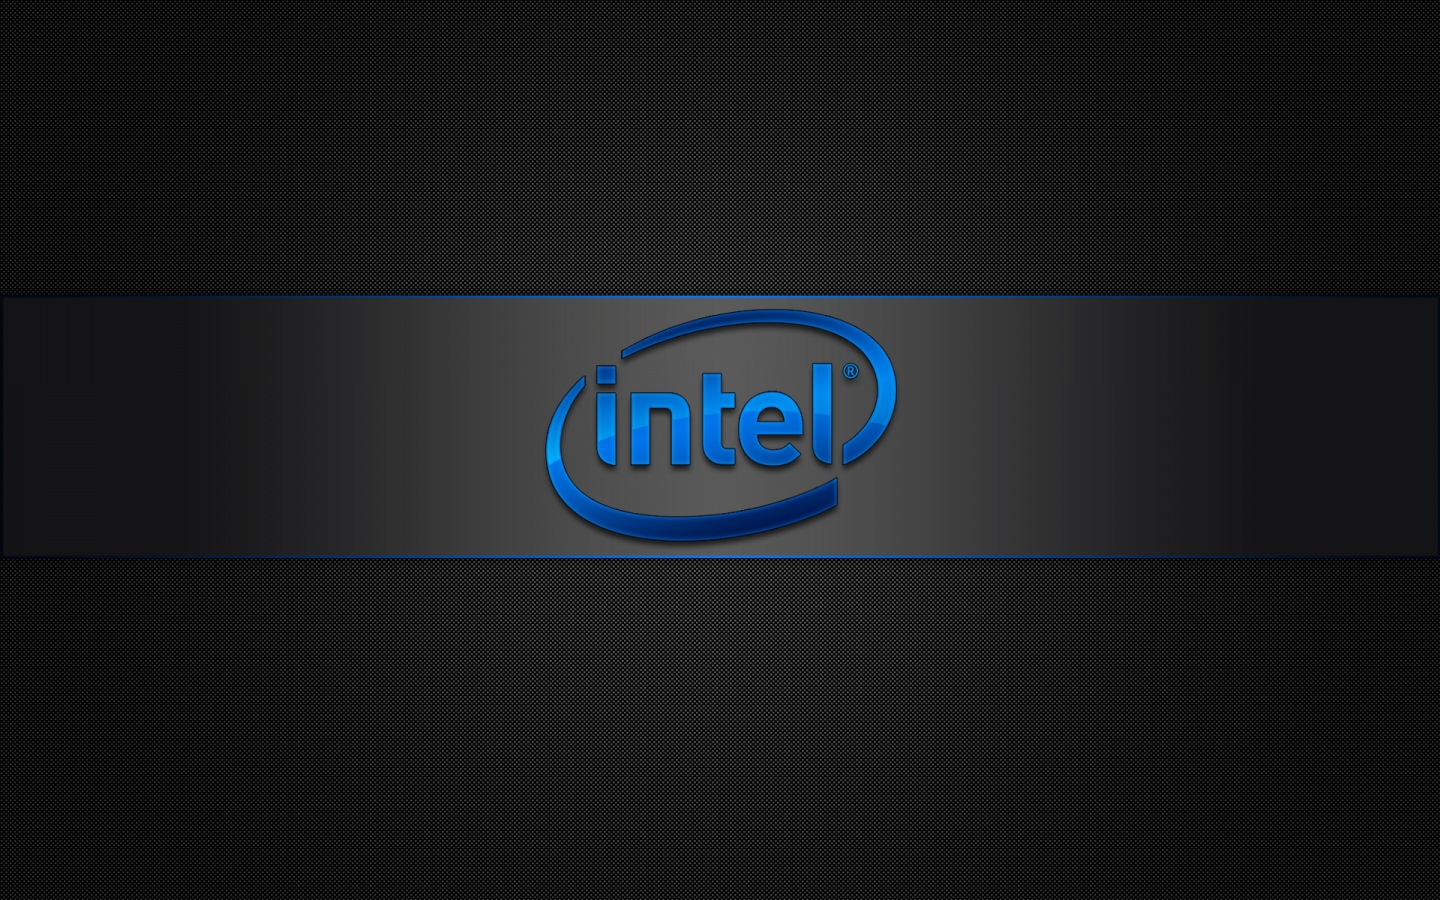 Intel for 1440 x 900 widescreen resolution